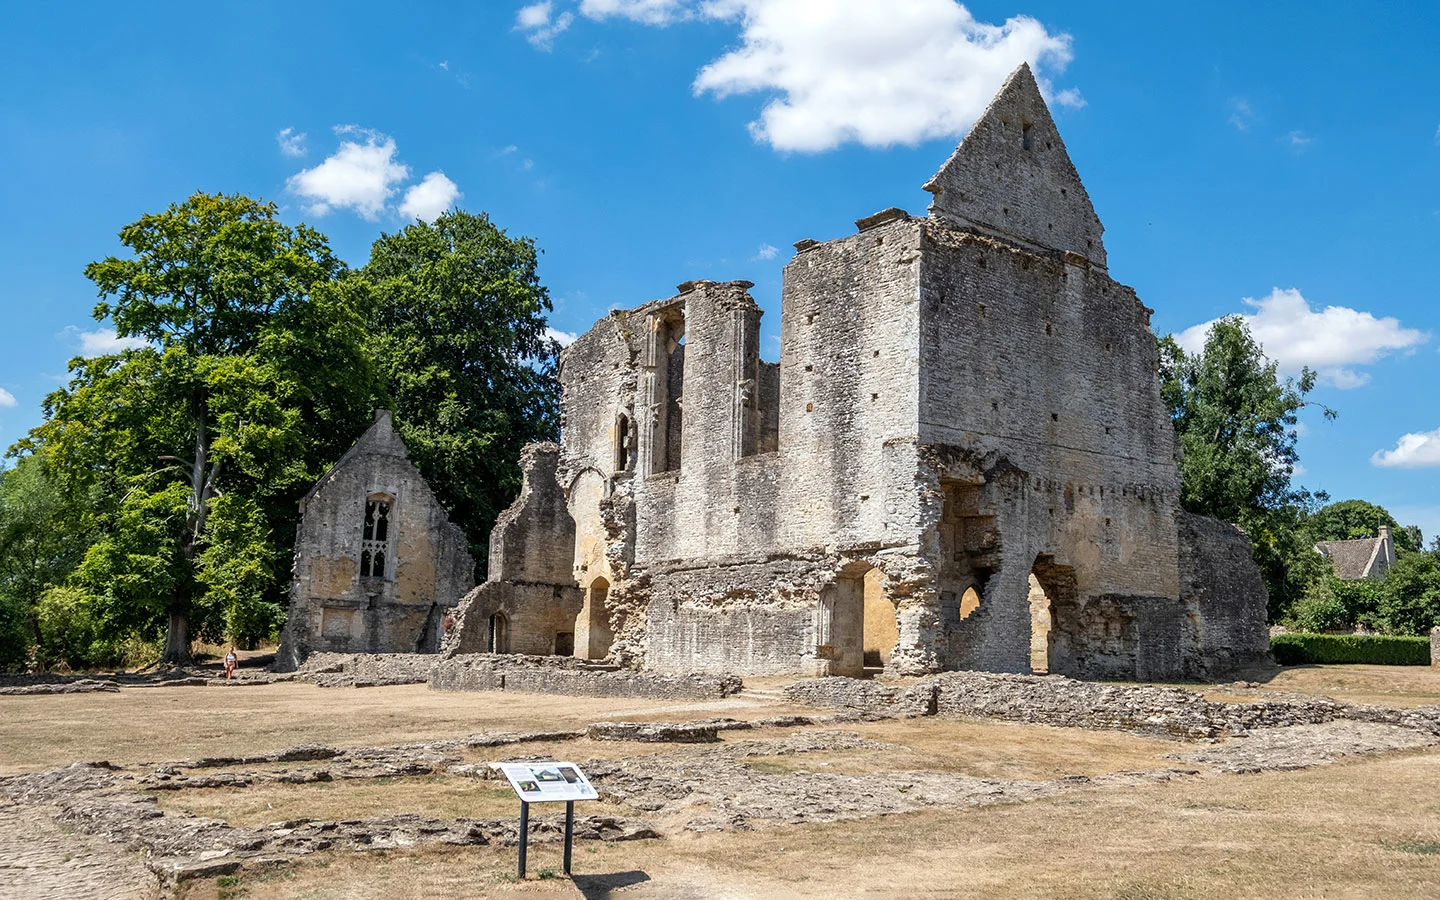 Visiting Minster Lovell Hall: Riverside ruins in the Cotswolds